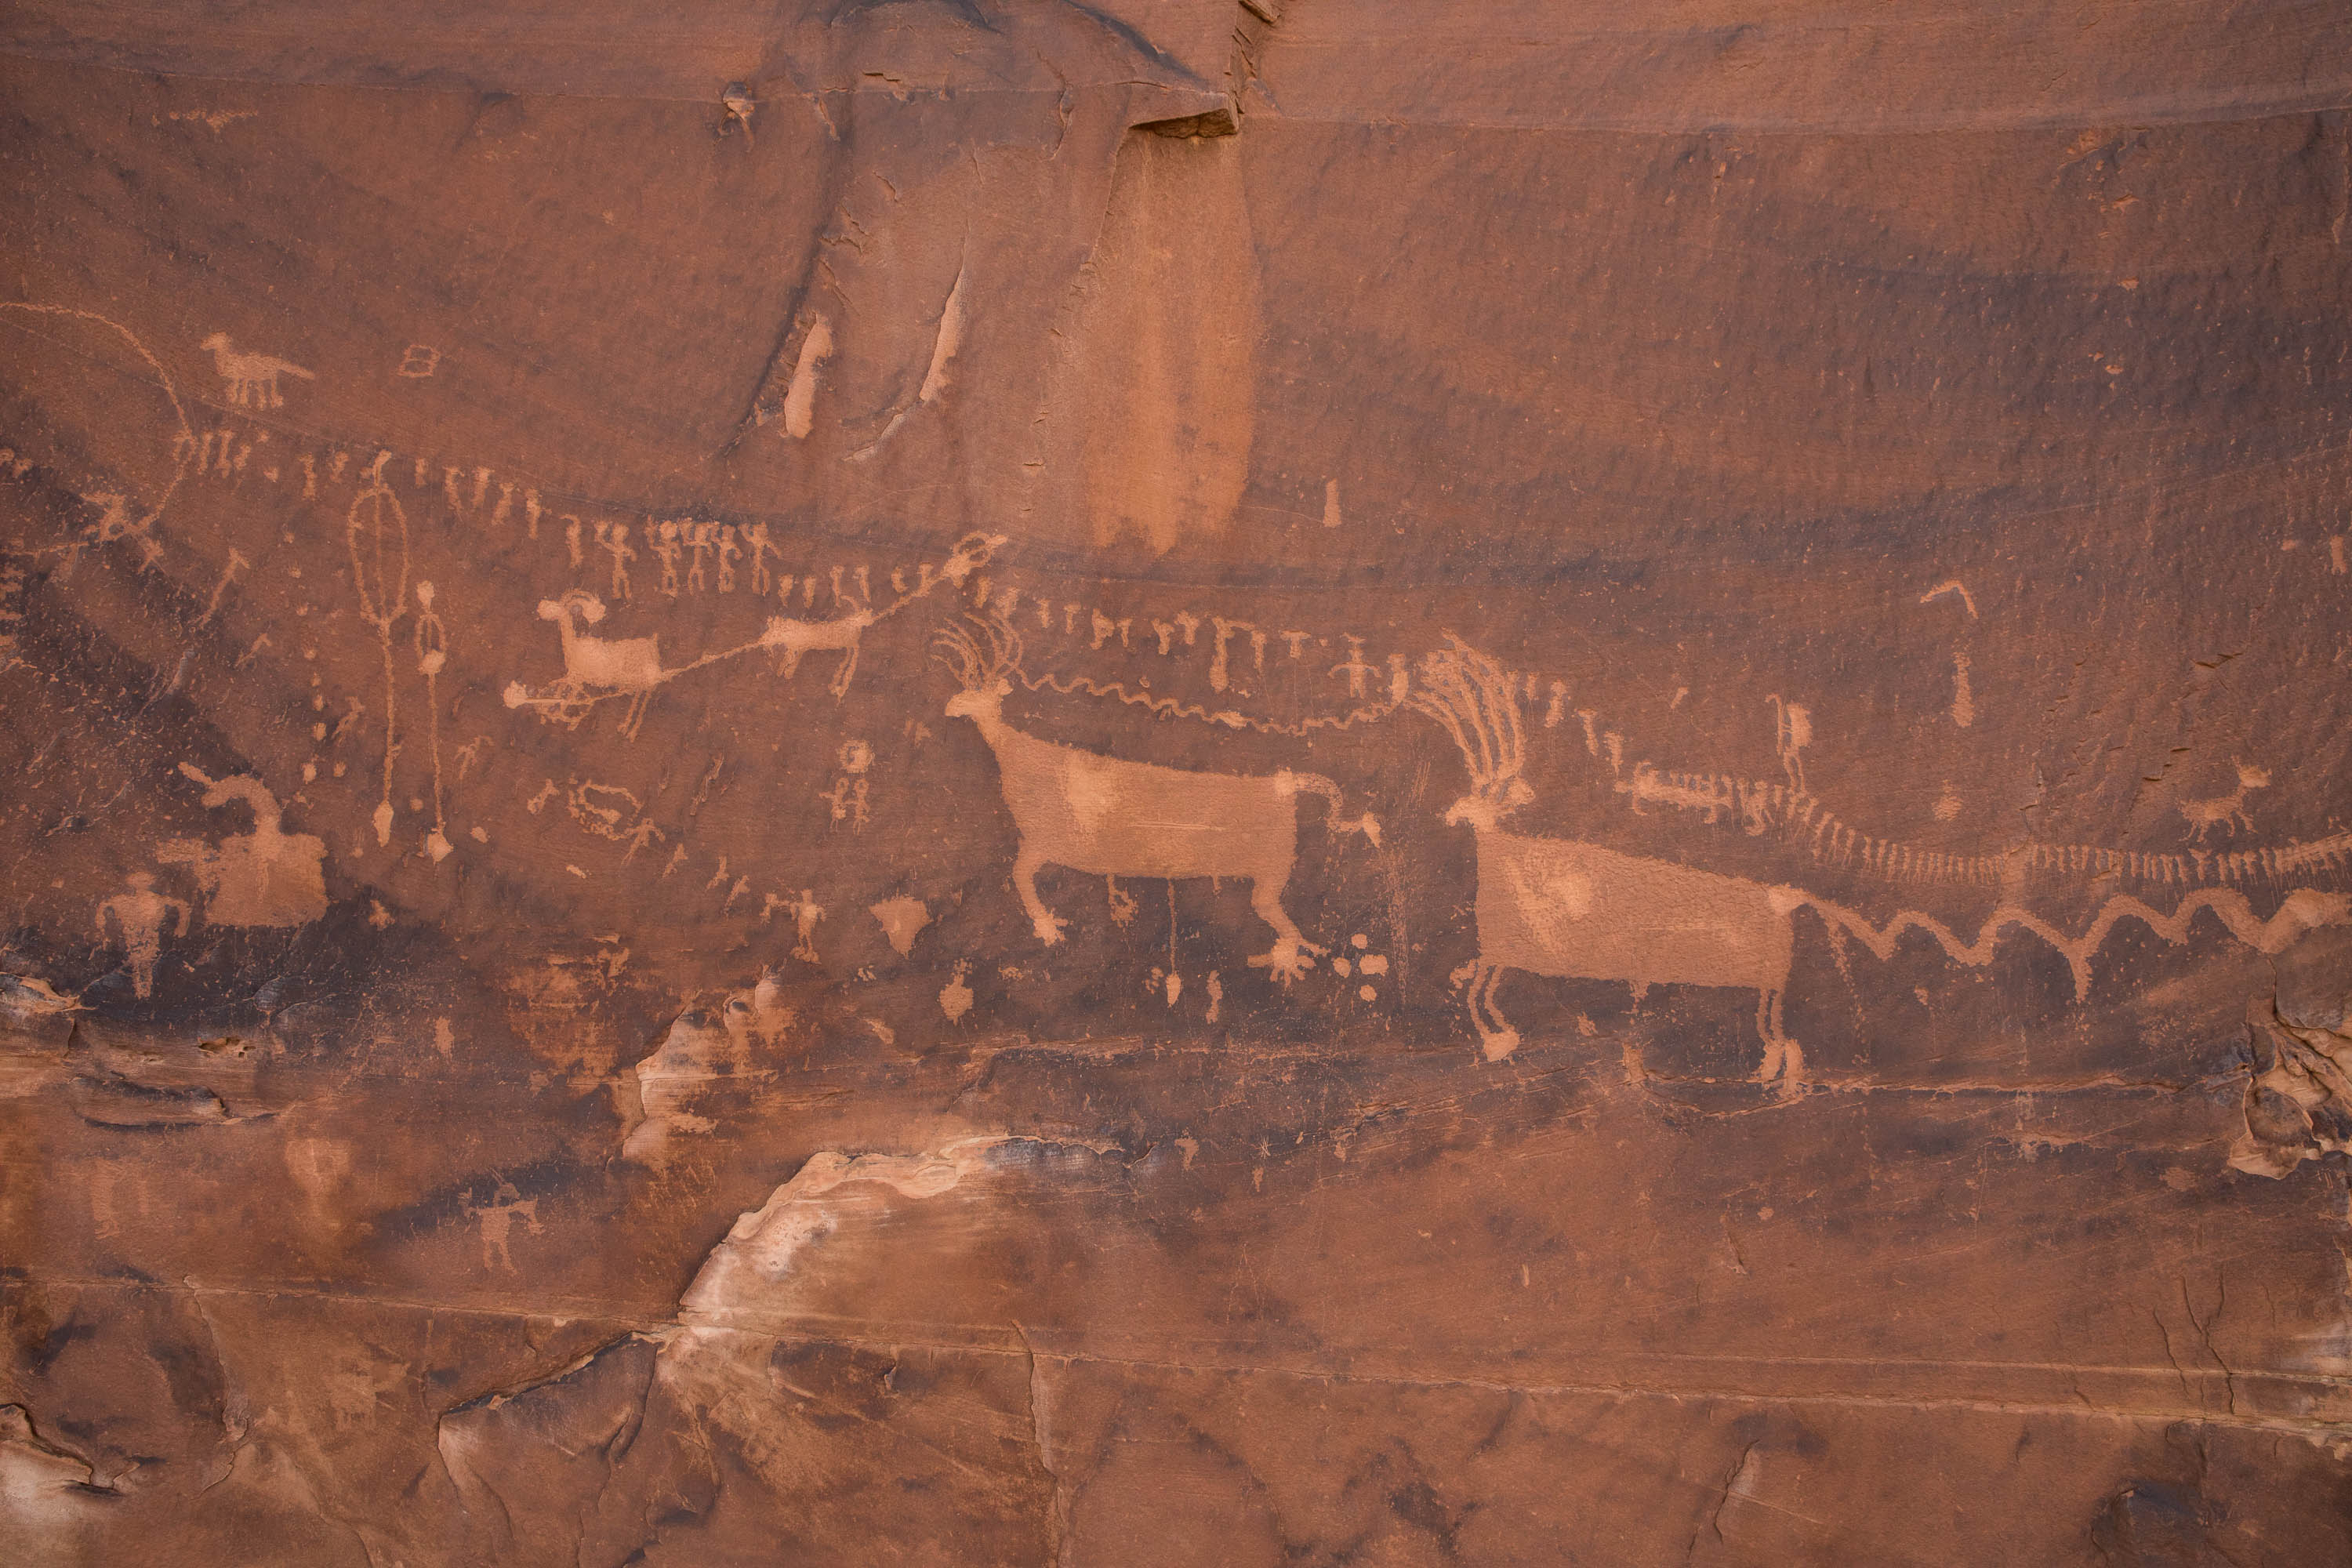 A detail of the Procession Panel in Bears Ears National Monument